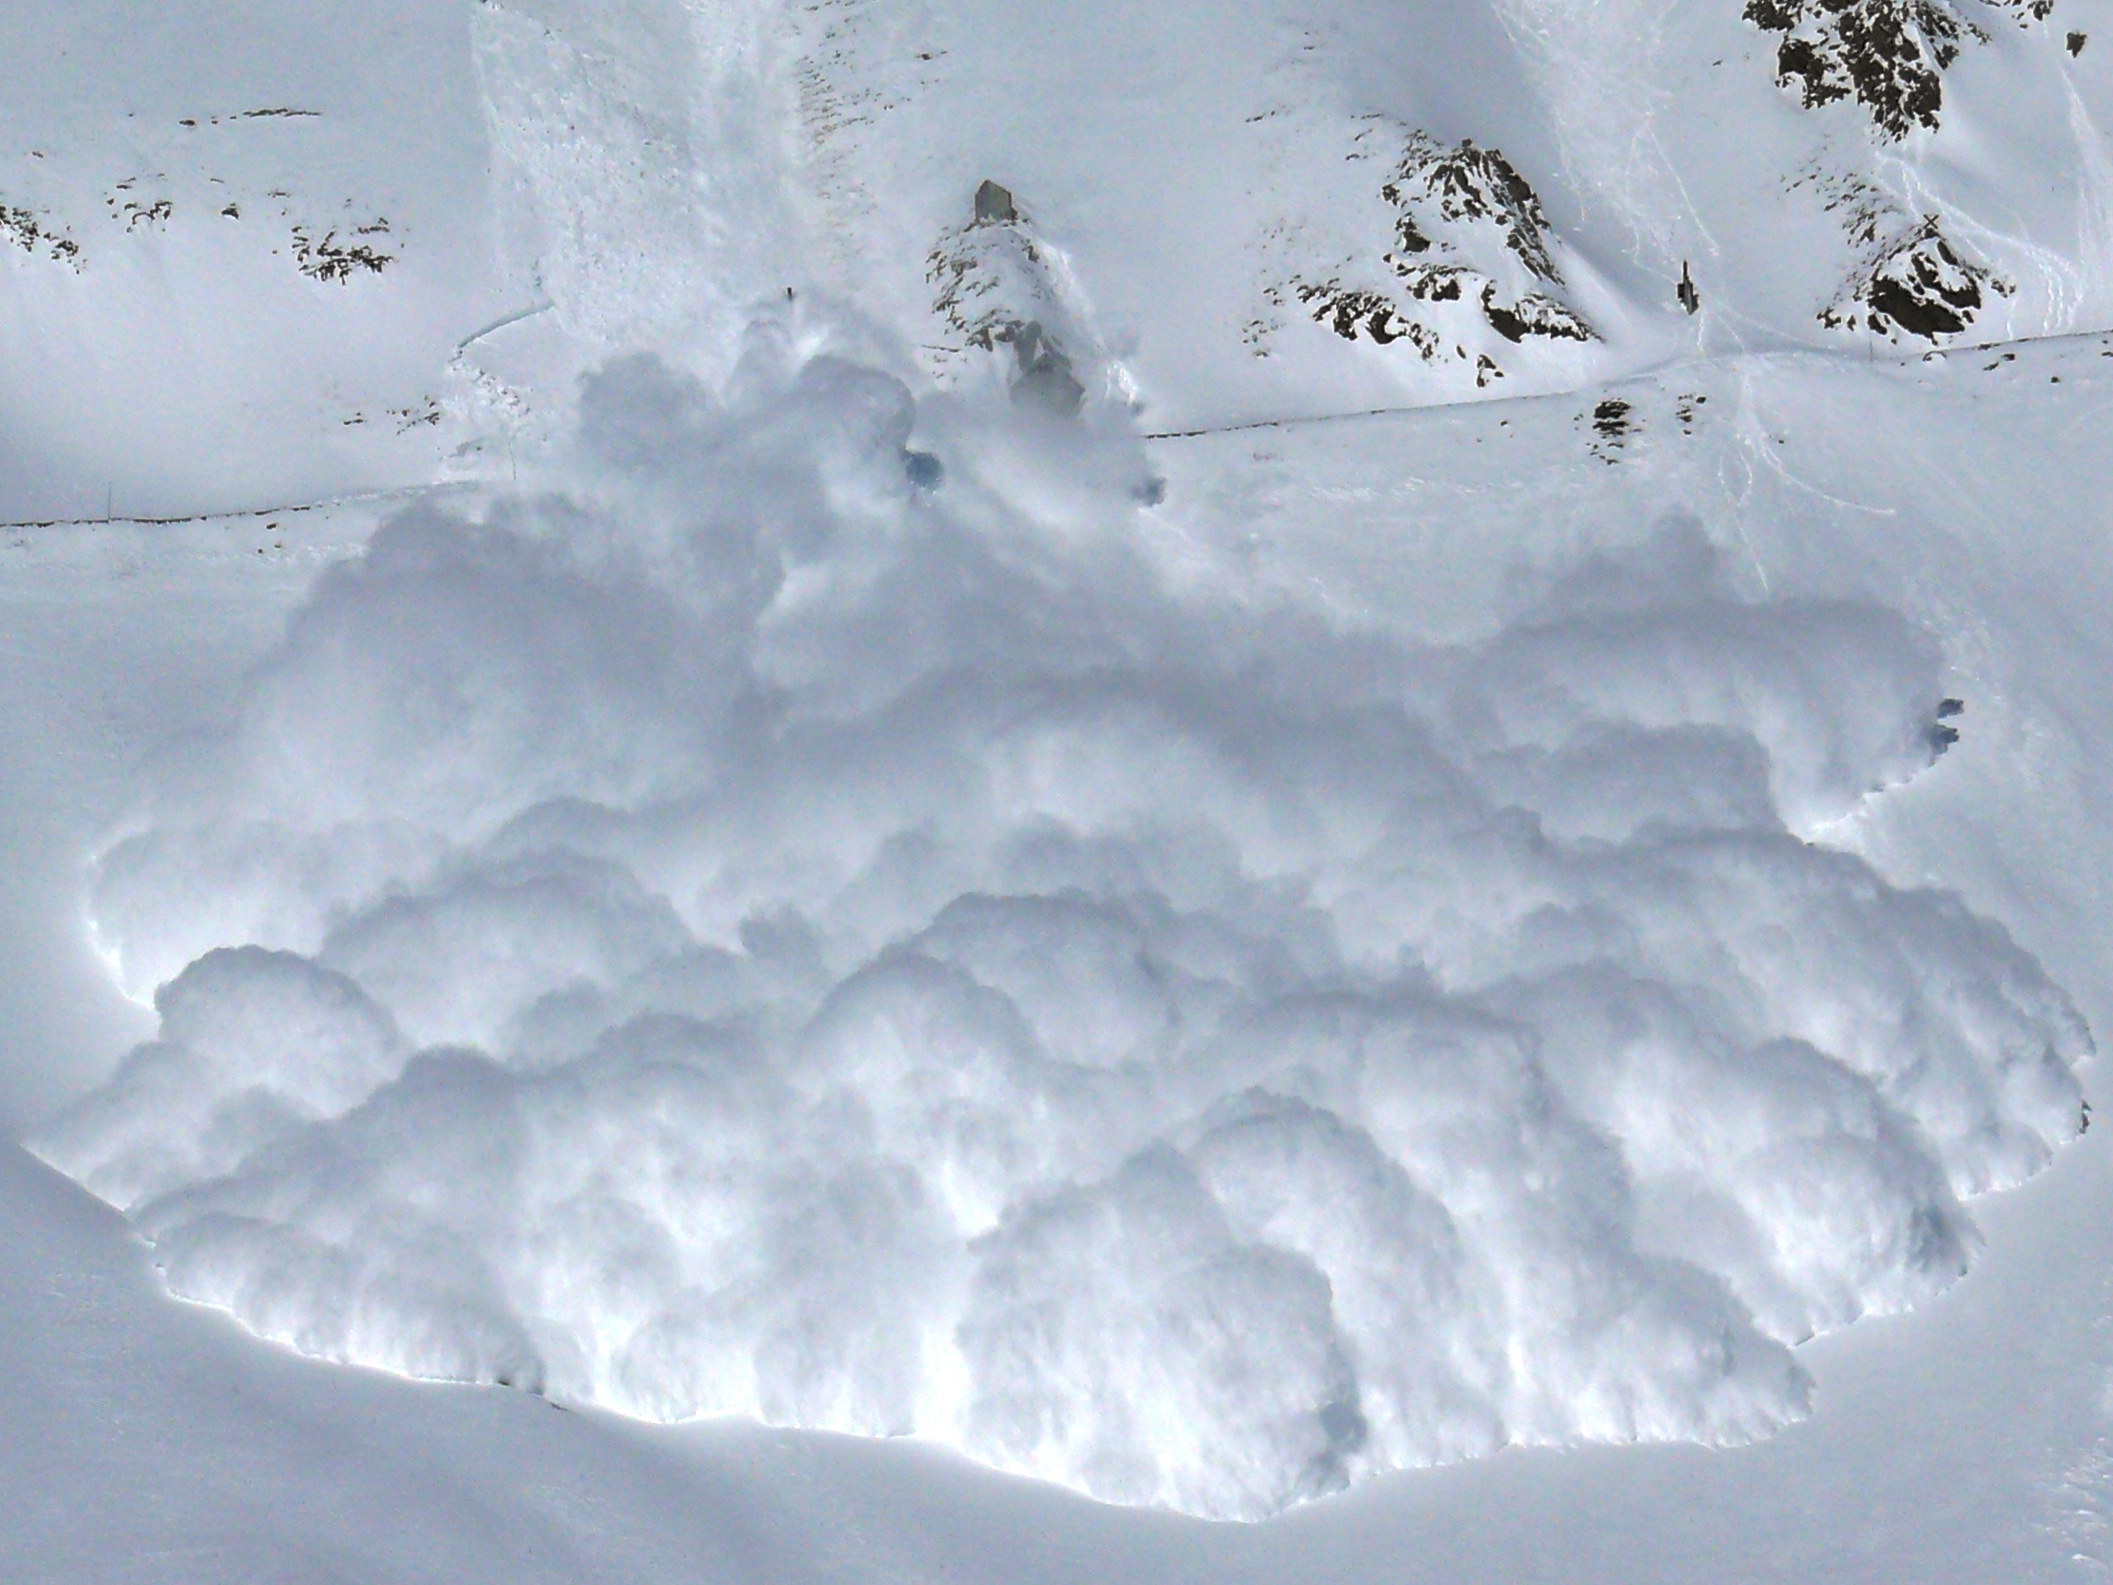 Stock avalanche image